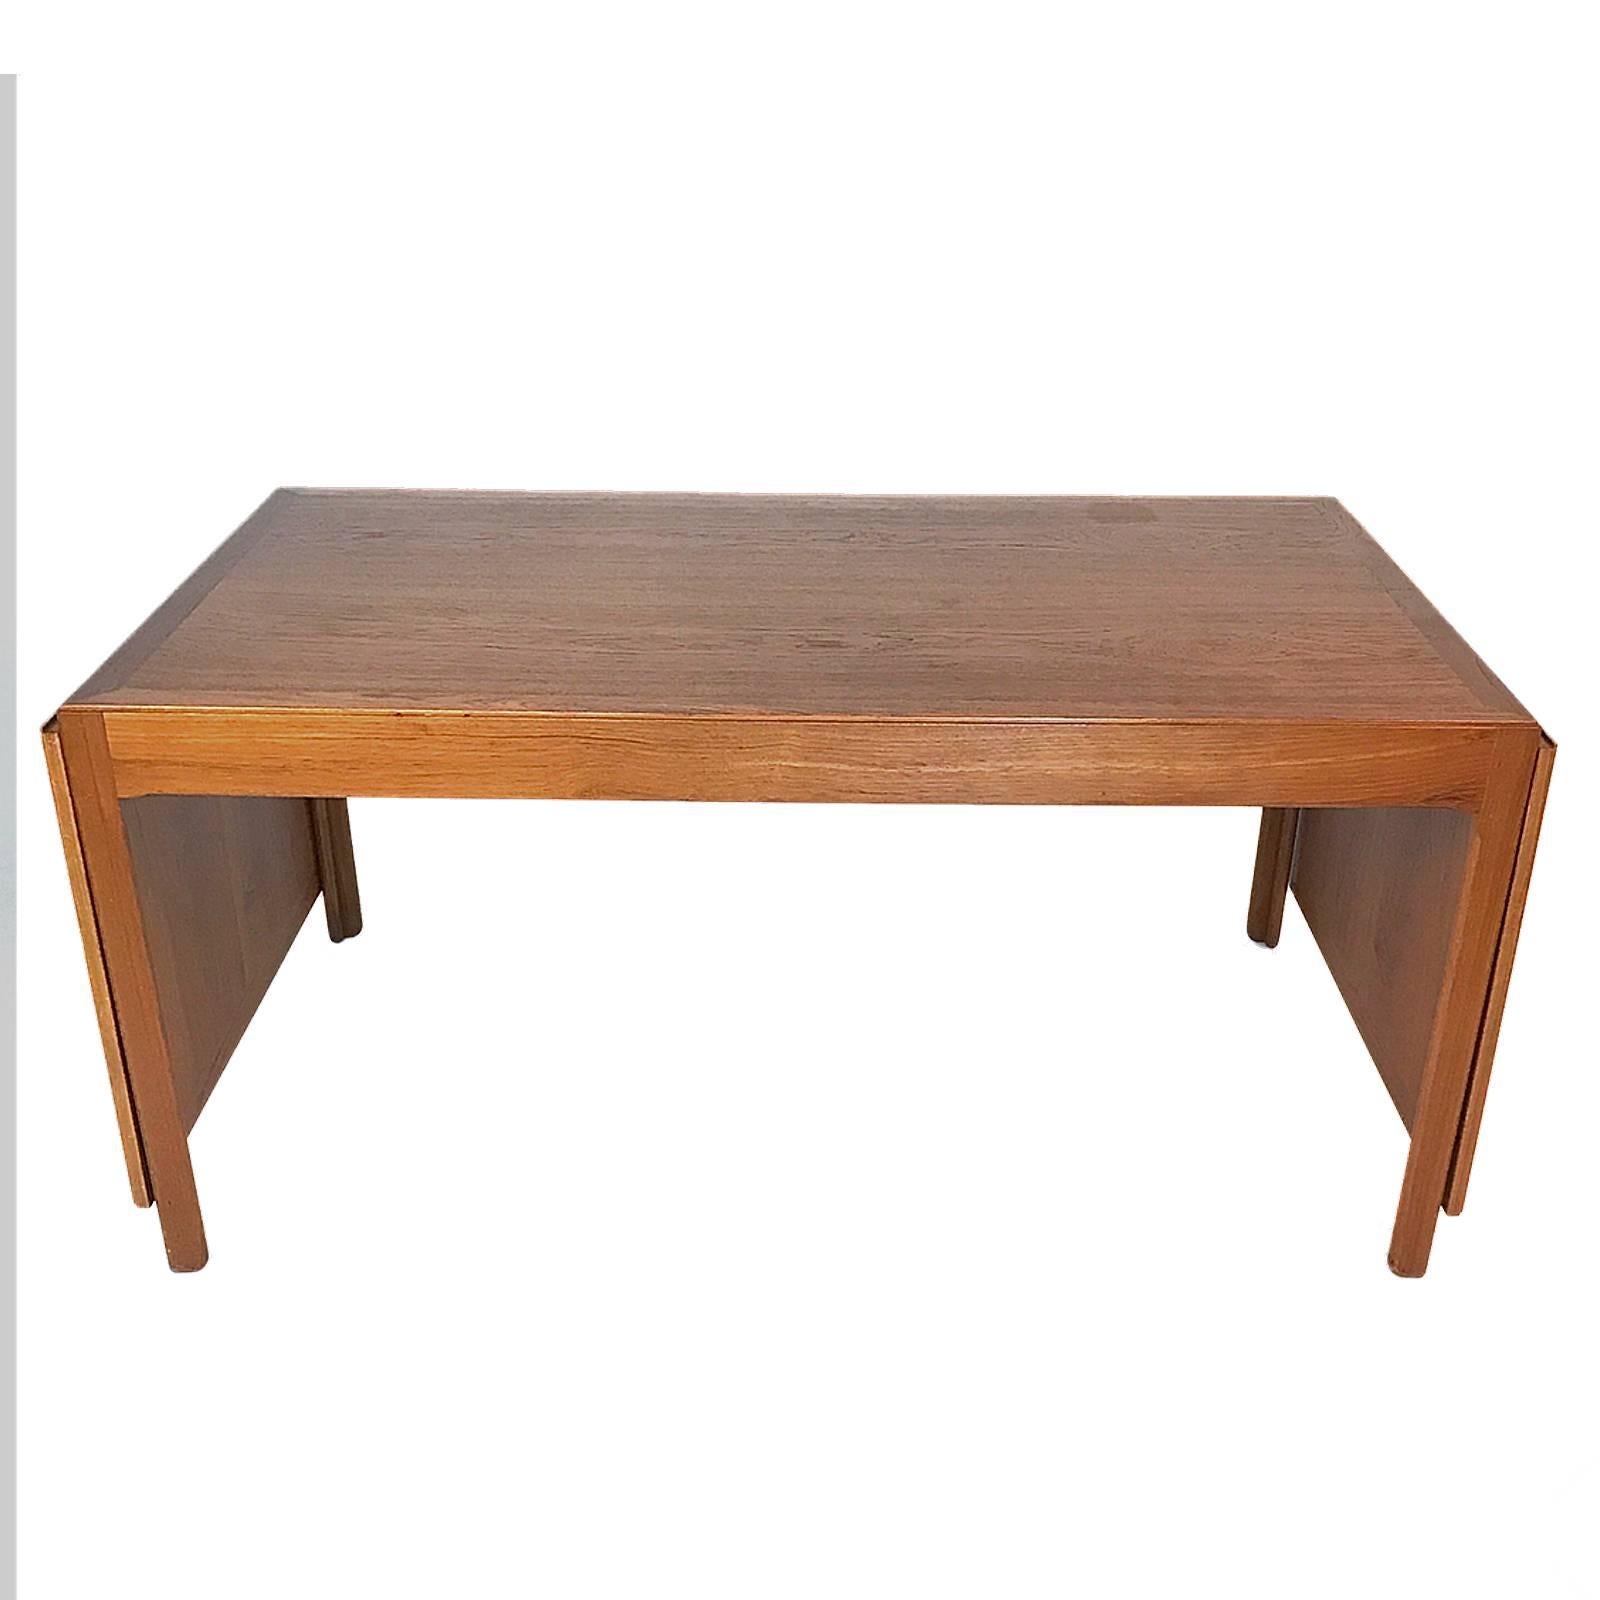 A teak dining table with profiled legs and edges. Top has detachable drop down leafs with brass fittings. This example was made by cabinetmaker Erhard Rasmussen in the1960s.The top measures 58 5/8 when the leaves are down or removed. Each leaf